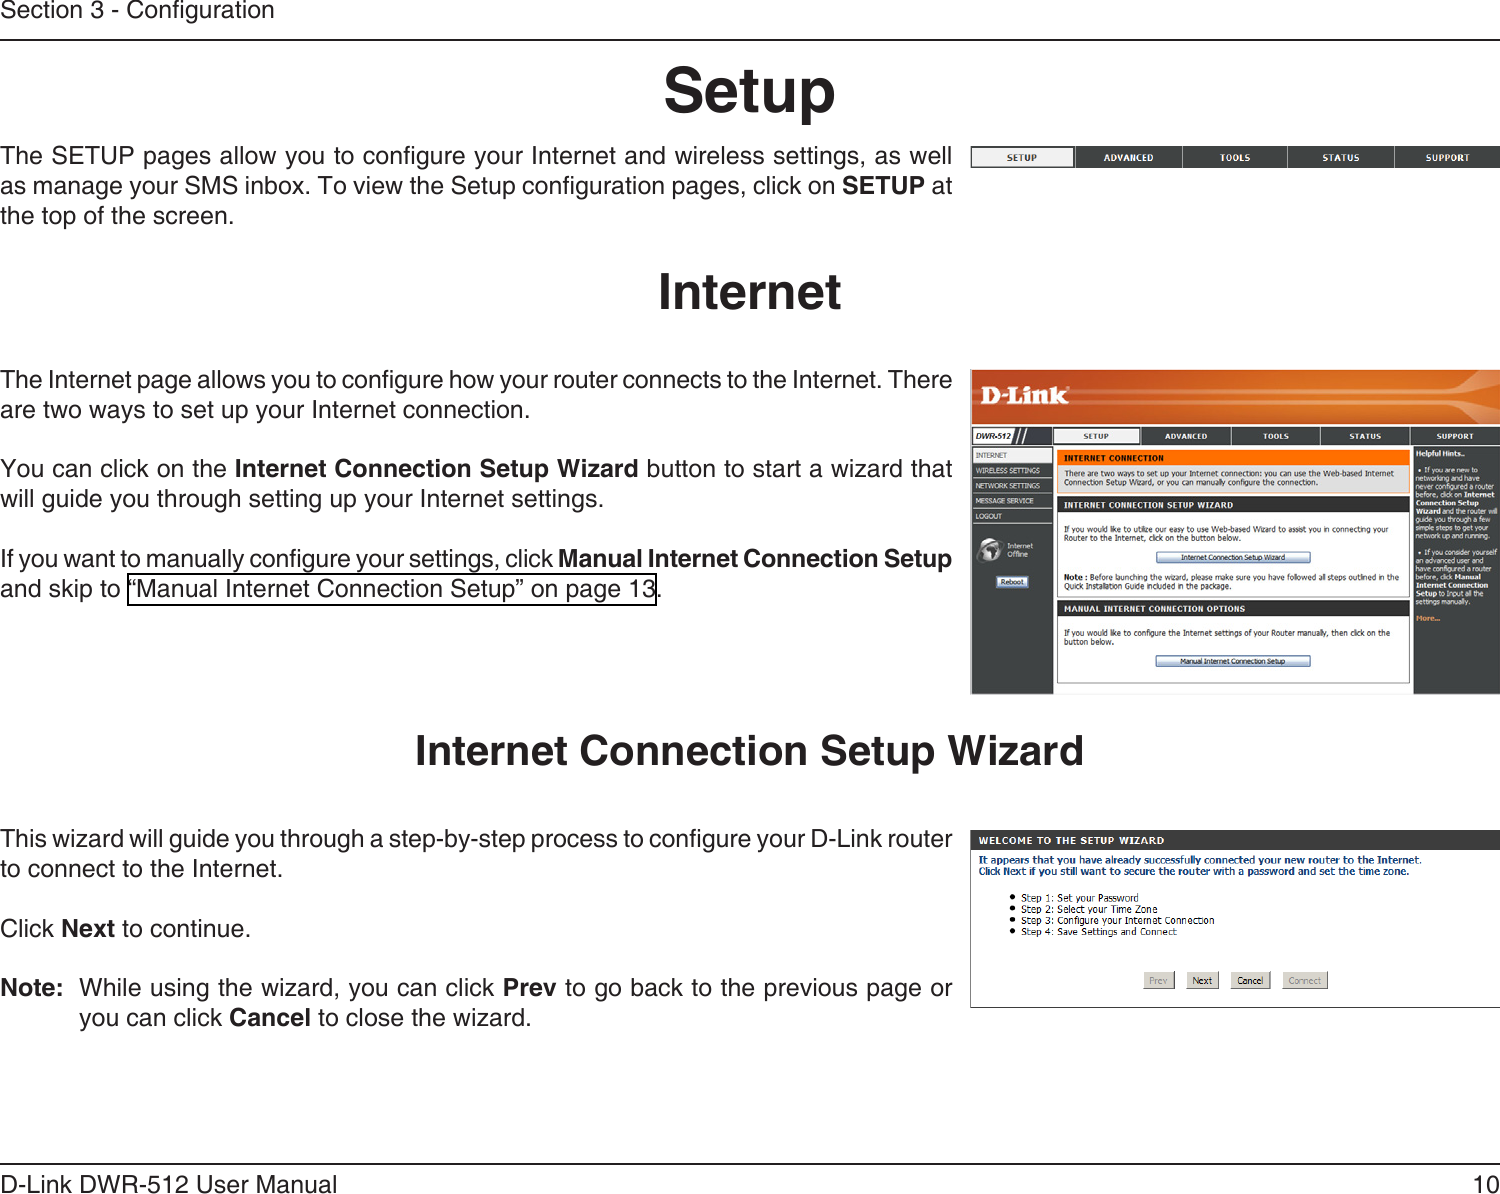 10D-Link DWR-512 User ManualSection 3 - CongurationSetupThis wizard will guide you through a step-by-step process to congure your D-Link router to connect to the Internet.Click Next to continue.Note:  While using the wizard, you can click Prev to go back to the previous page or you can click Cancel to close the wizard.Internet Connection Setup WizardThe SETUP pages allow you to congure your Internet and wireless settings, as well as manage your SMS inbox. To view the Setup conguration pages, click on SETUP at the top of the screen.The Internet page allows you to congure how your router connects to the Internet. There are two ways to set up your Internet connection. You can click on the Internet Connection Setup Wizard button to start a wizard that will guide you through setting up your Internet settings.If you want to manually congure your settings, click Manual Internet Connection Setup and skip to “Manual Internet Connection Setup” on page 13.Internet